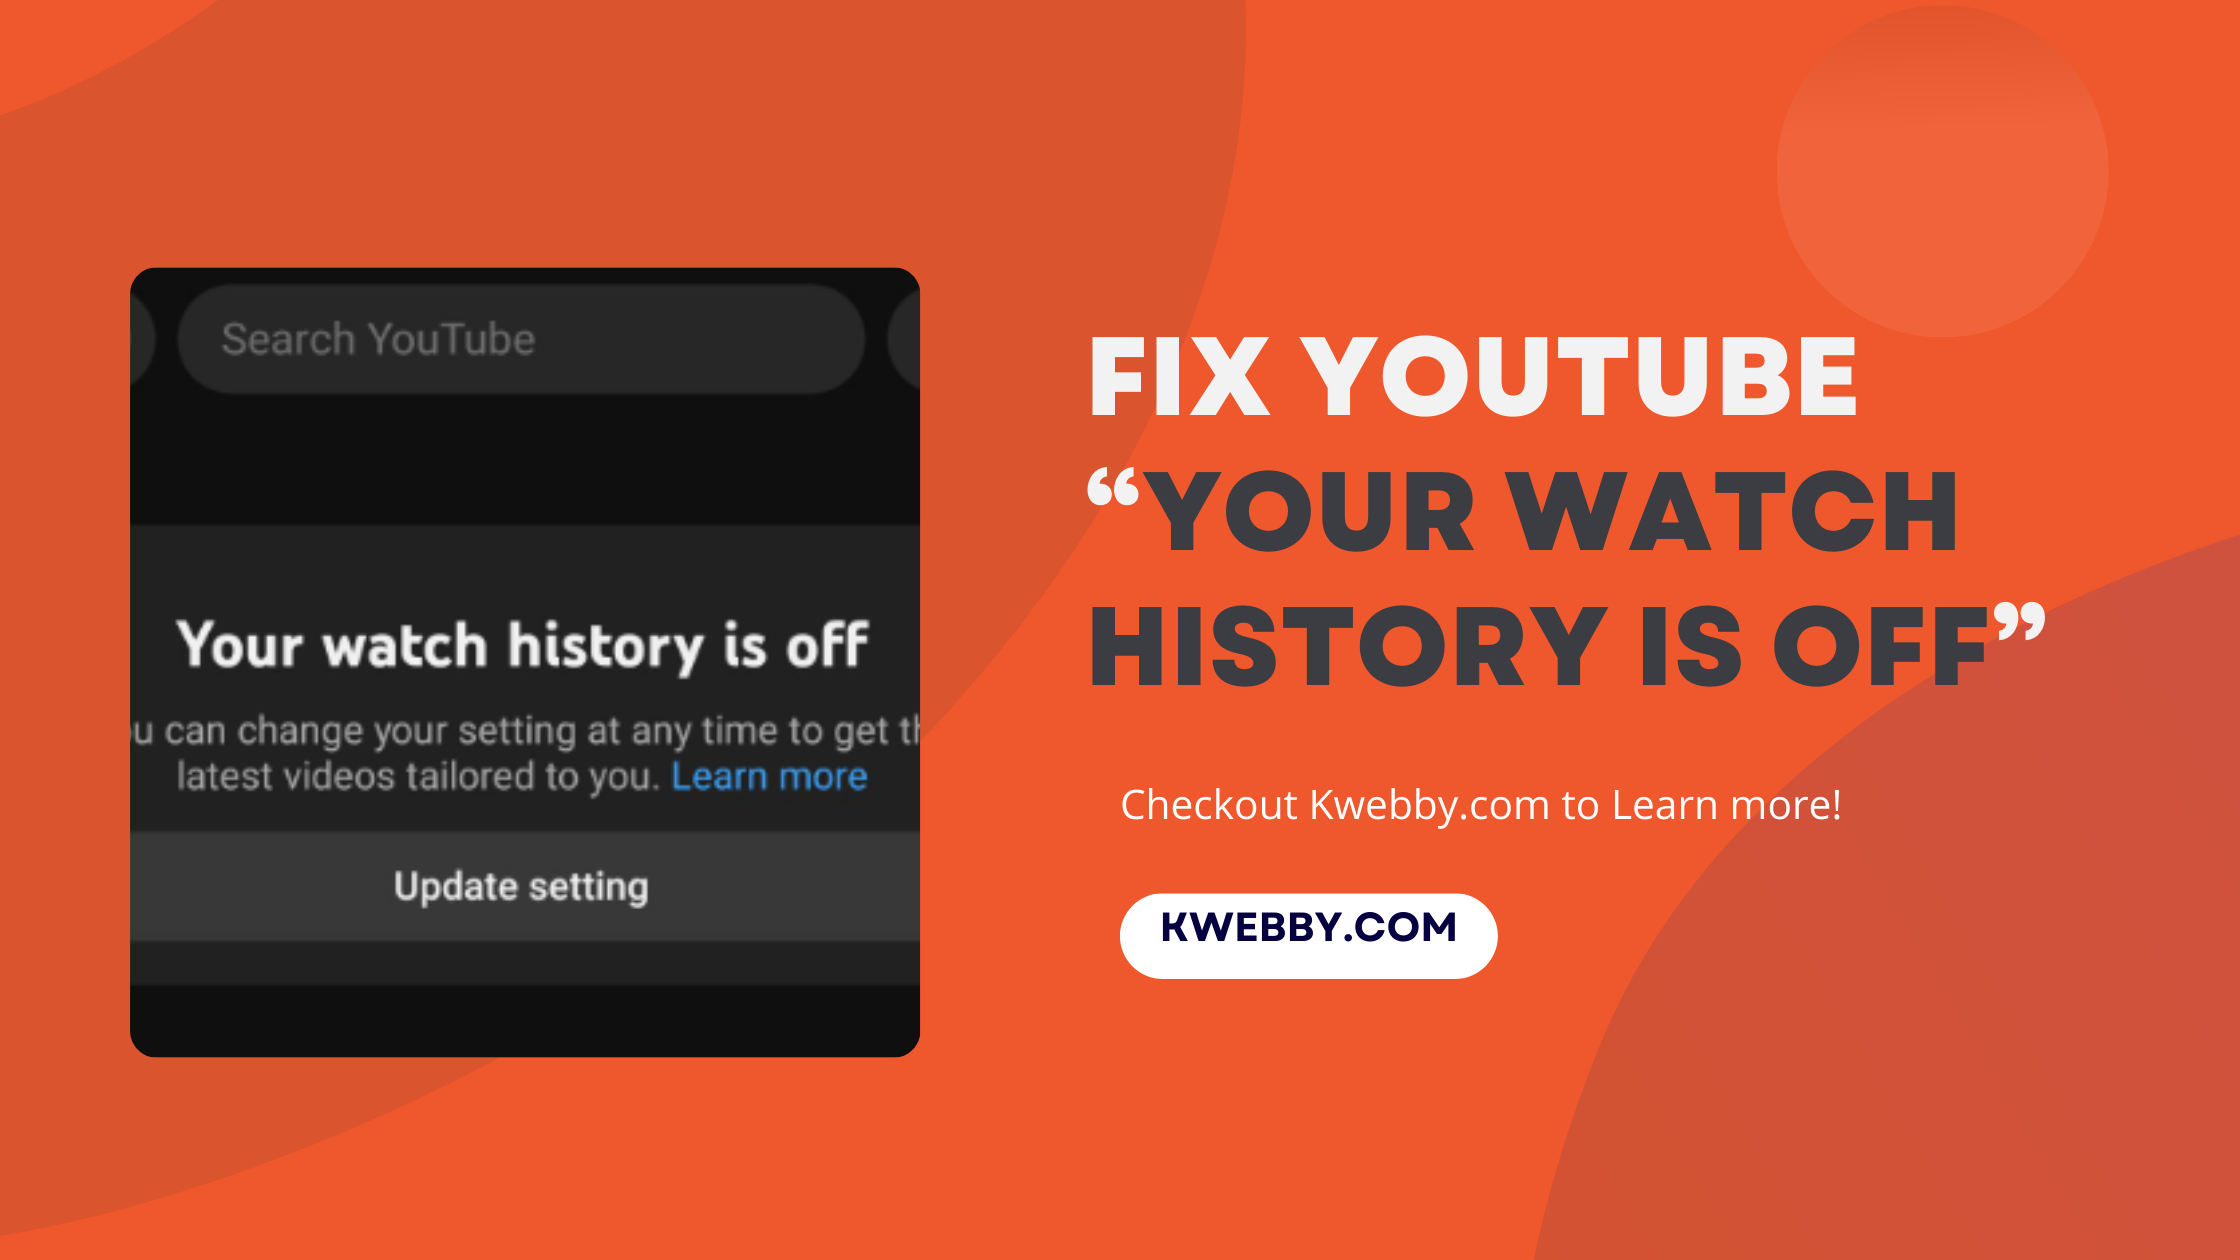 How to Fix YouTube “Your watch history is off”